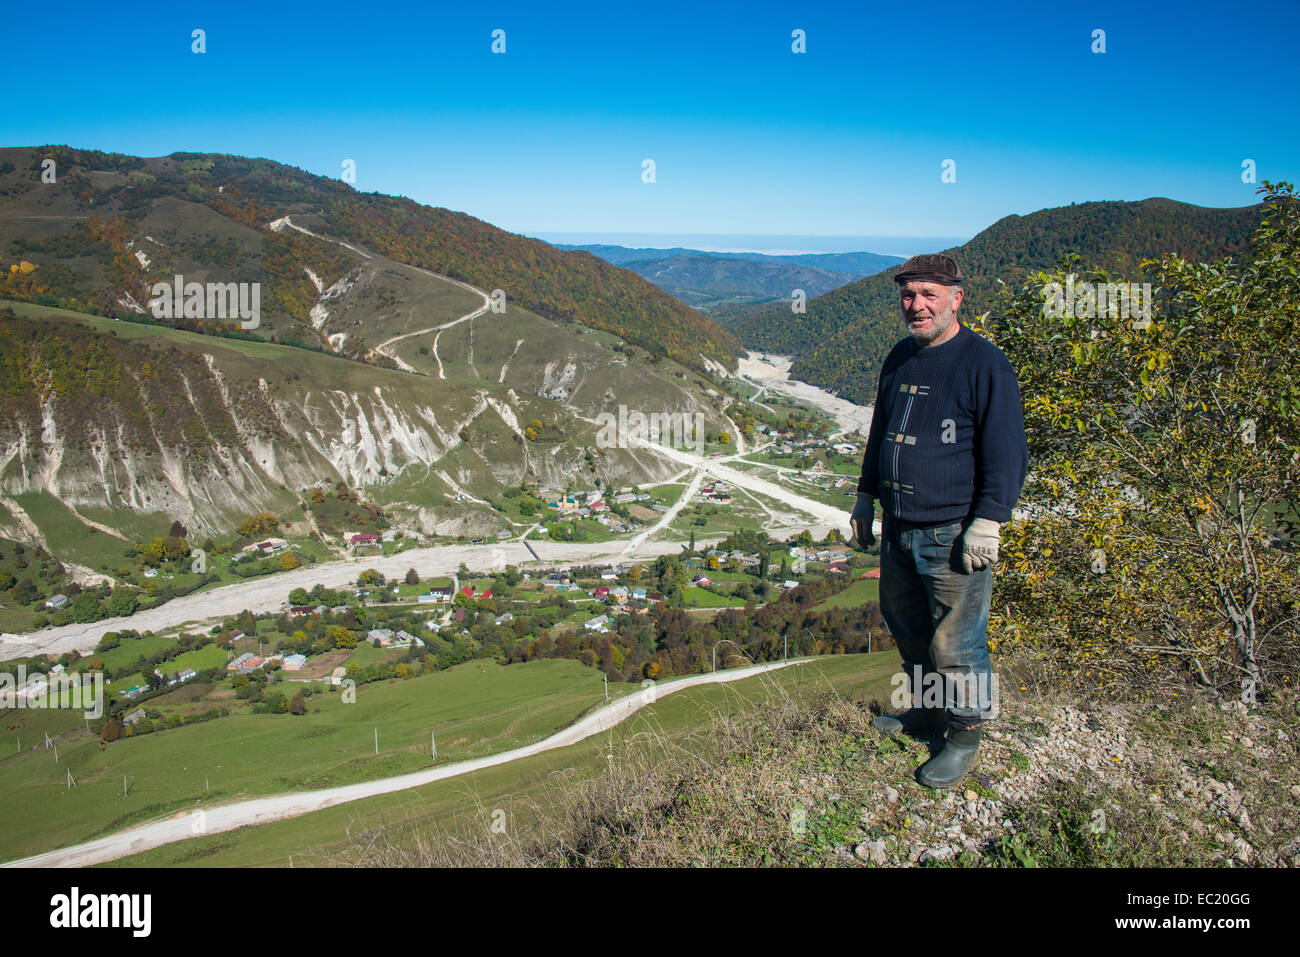 Old Chechen man at an overlook in the Chechen mountains, Chechnya, Caucasus, Russia Stock Photo